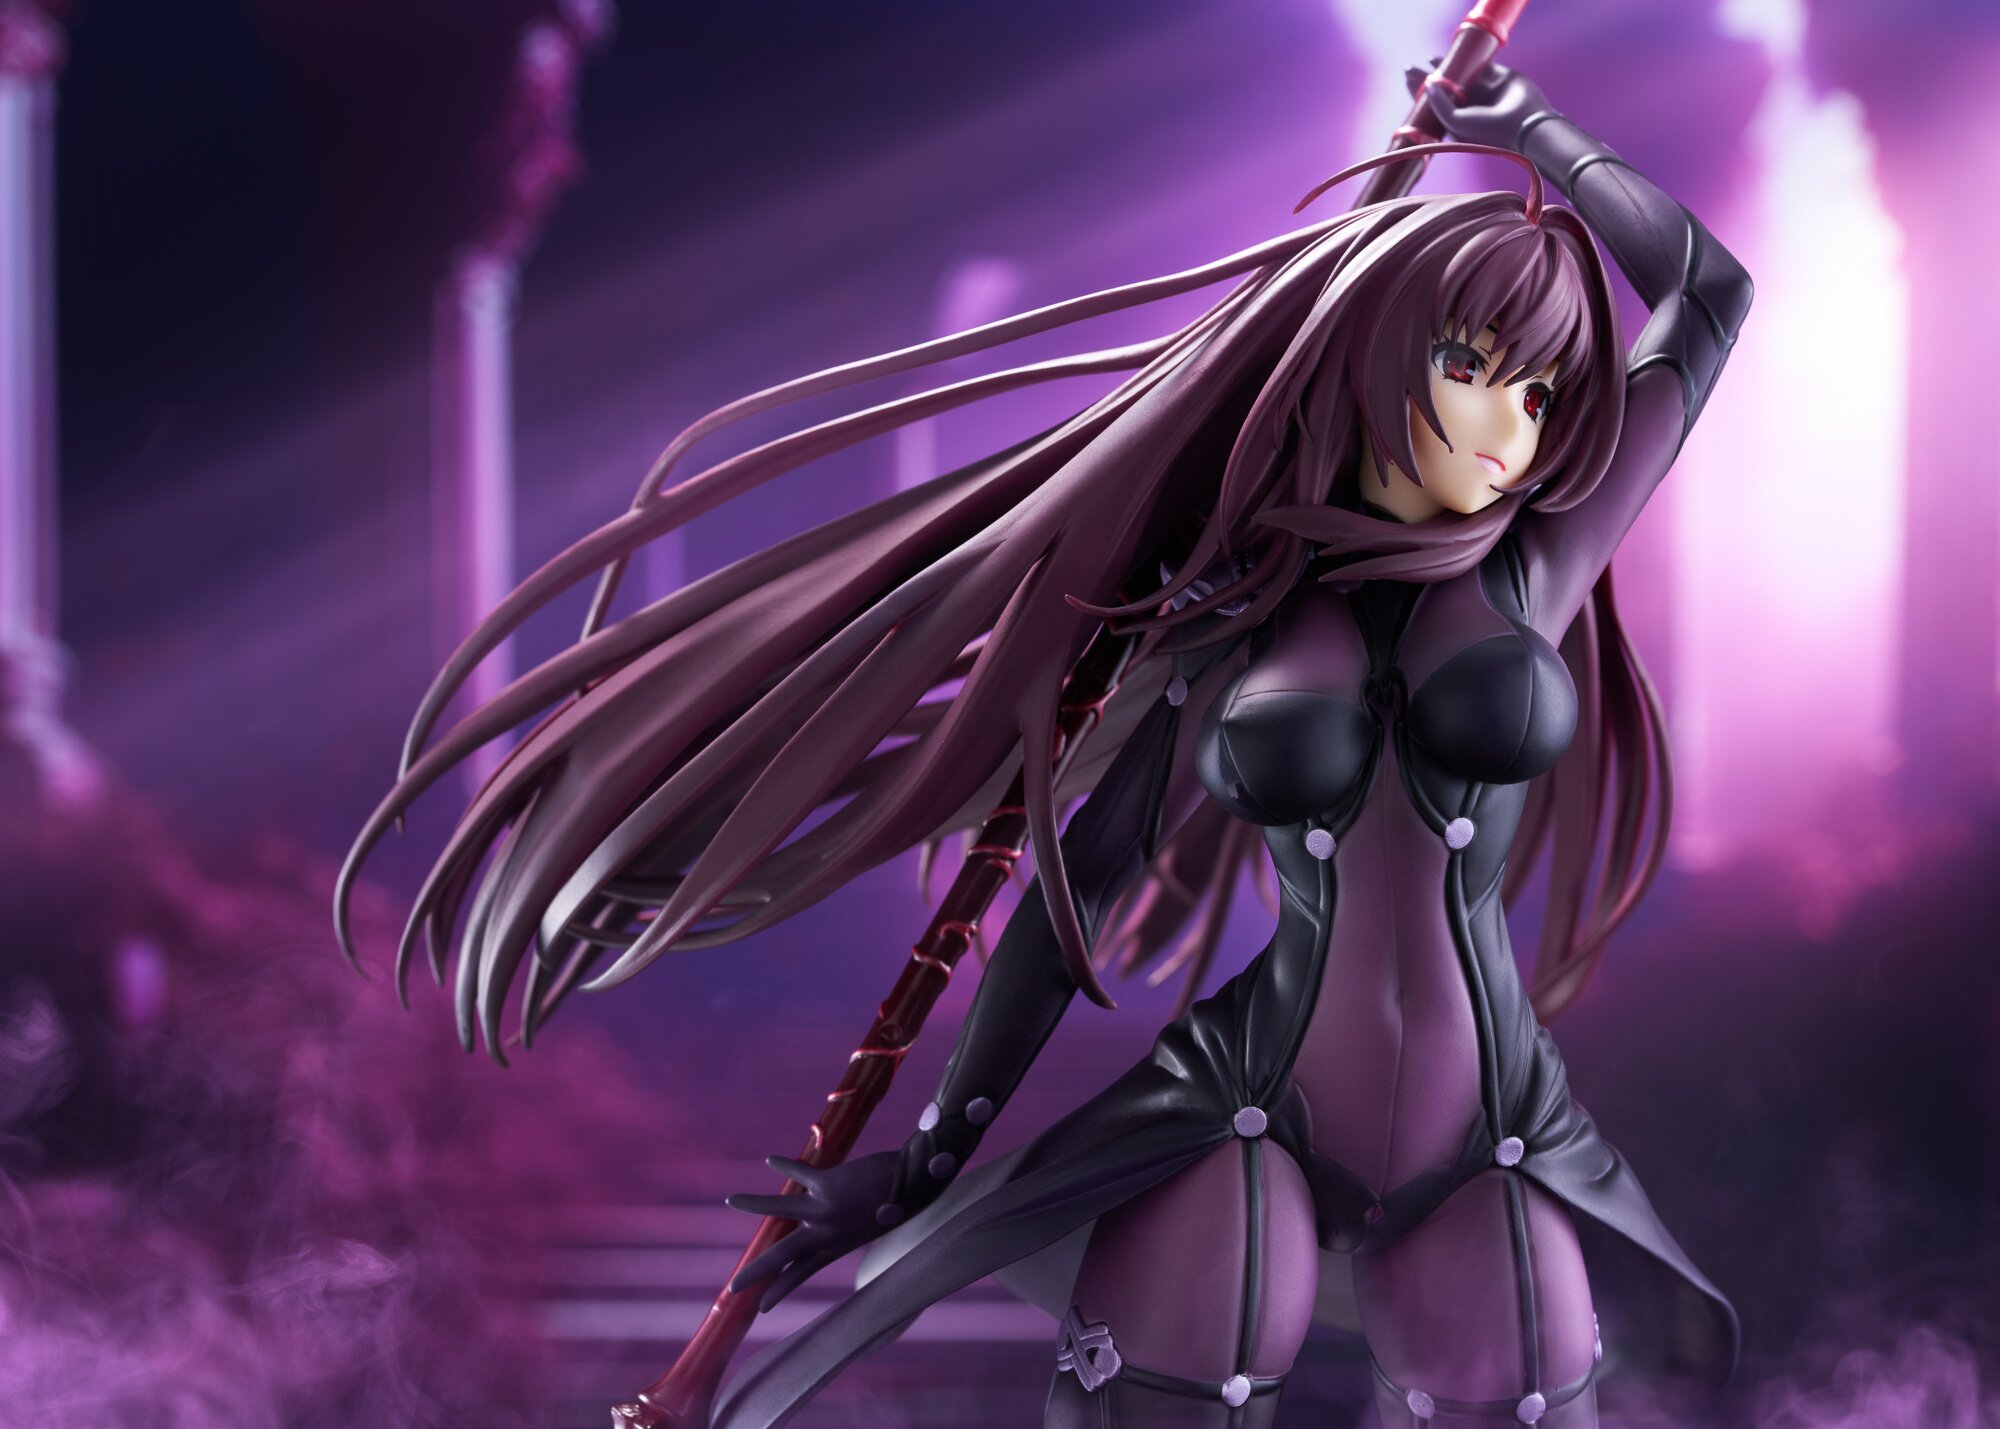 Fate girls : fatestaynight  Scathach fate, Anime, Fate anime series